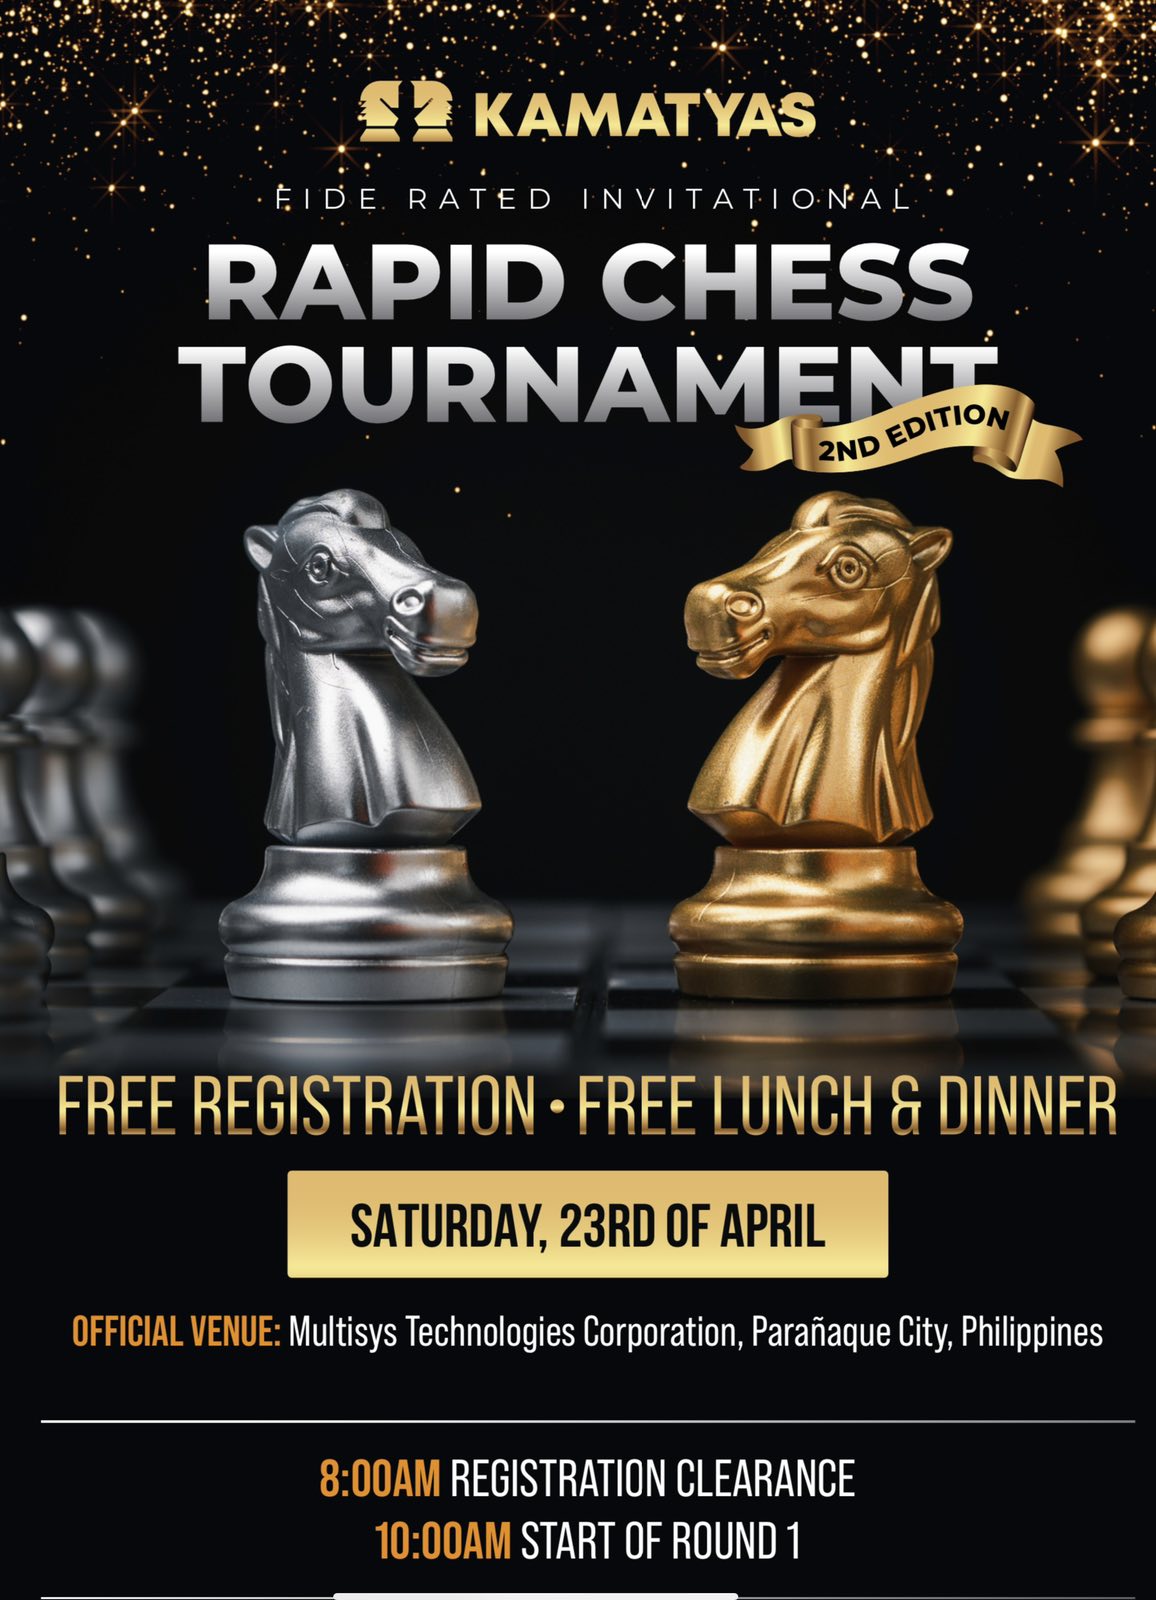 Rated Rapid Chess Tournament For All Ages And Skill Levels May 21